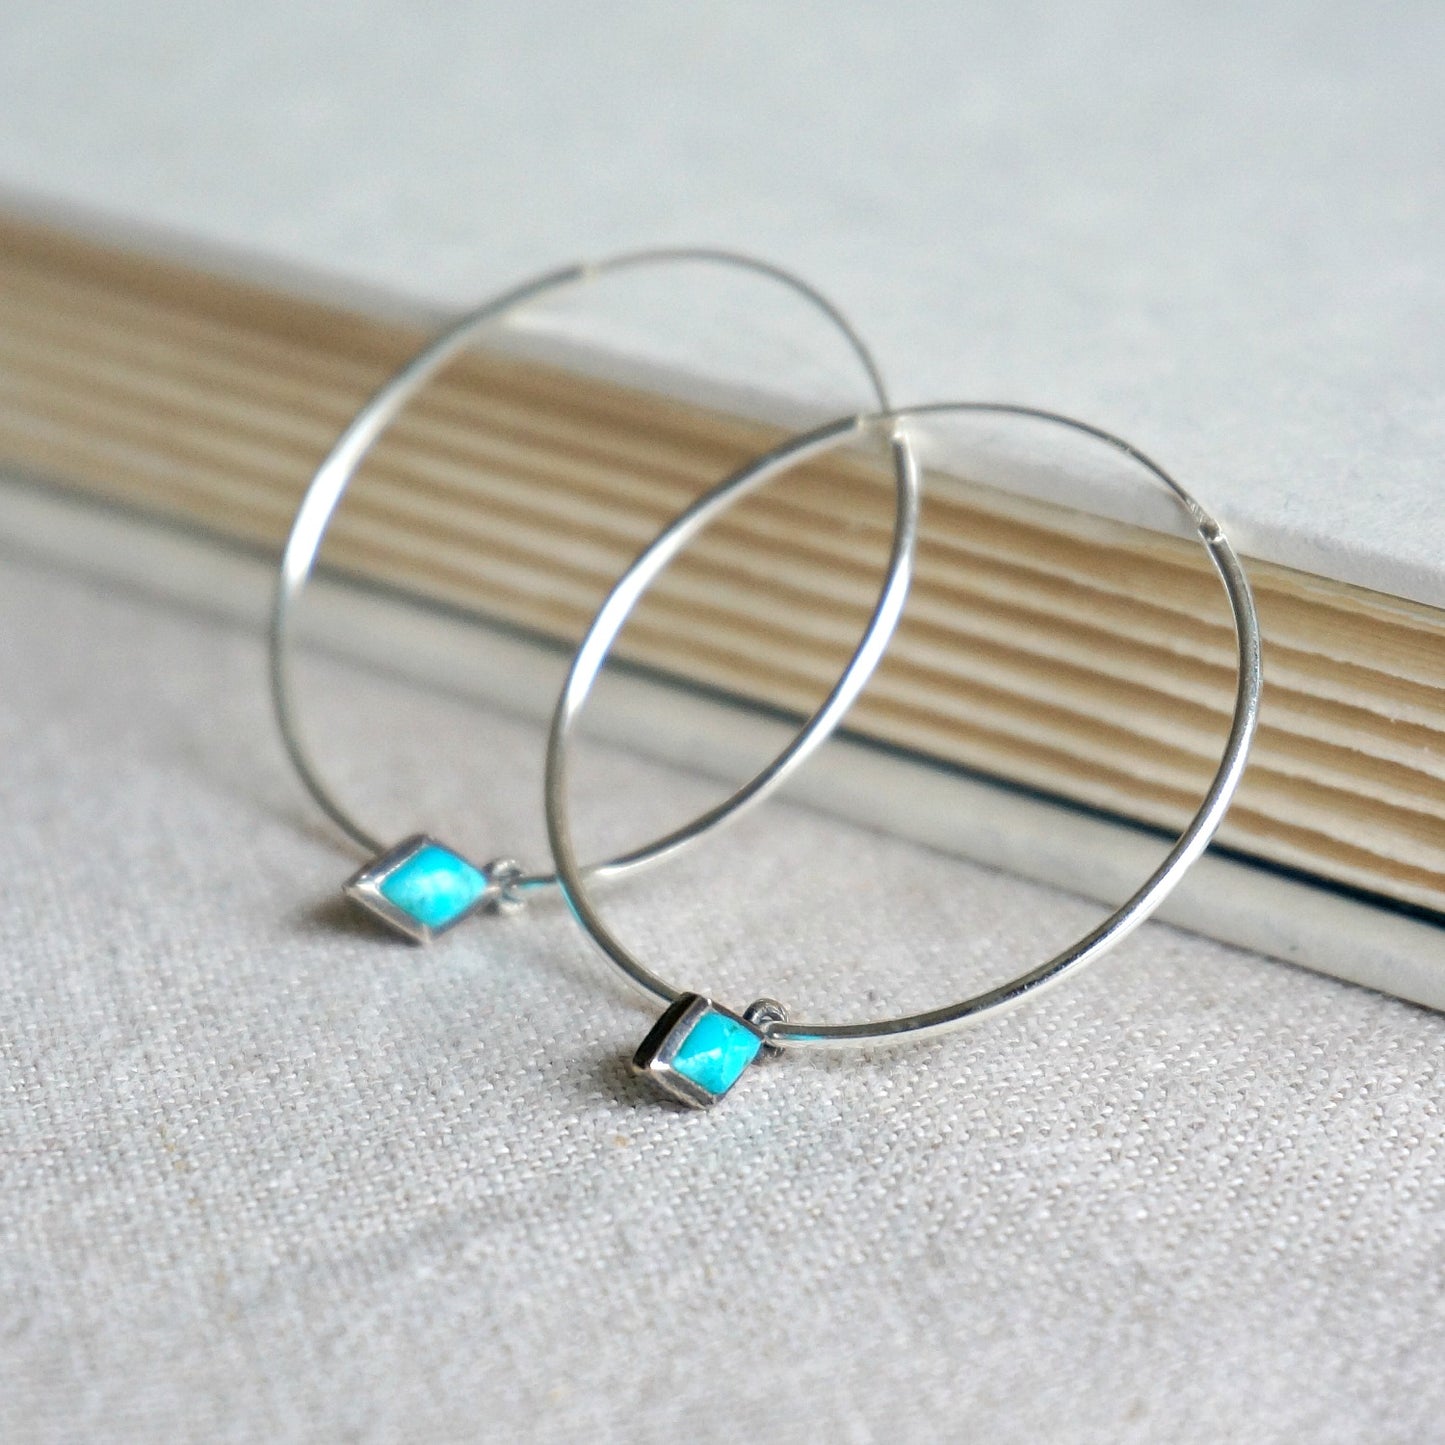 Load image into Gallery viewer, Dior Turquoise Hoop Earrings - SOWELL JEWELRY
